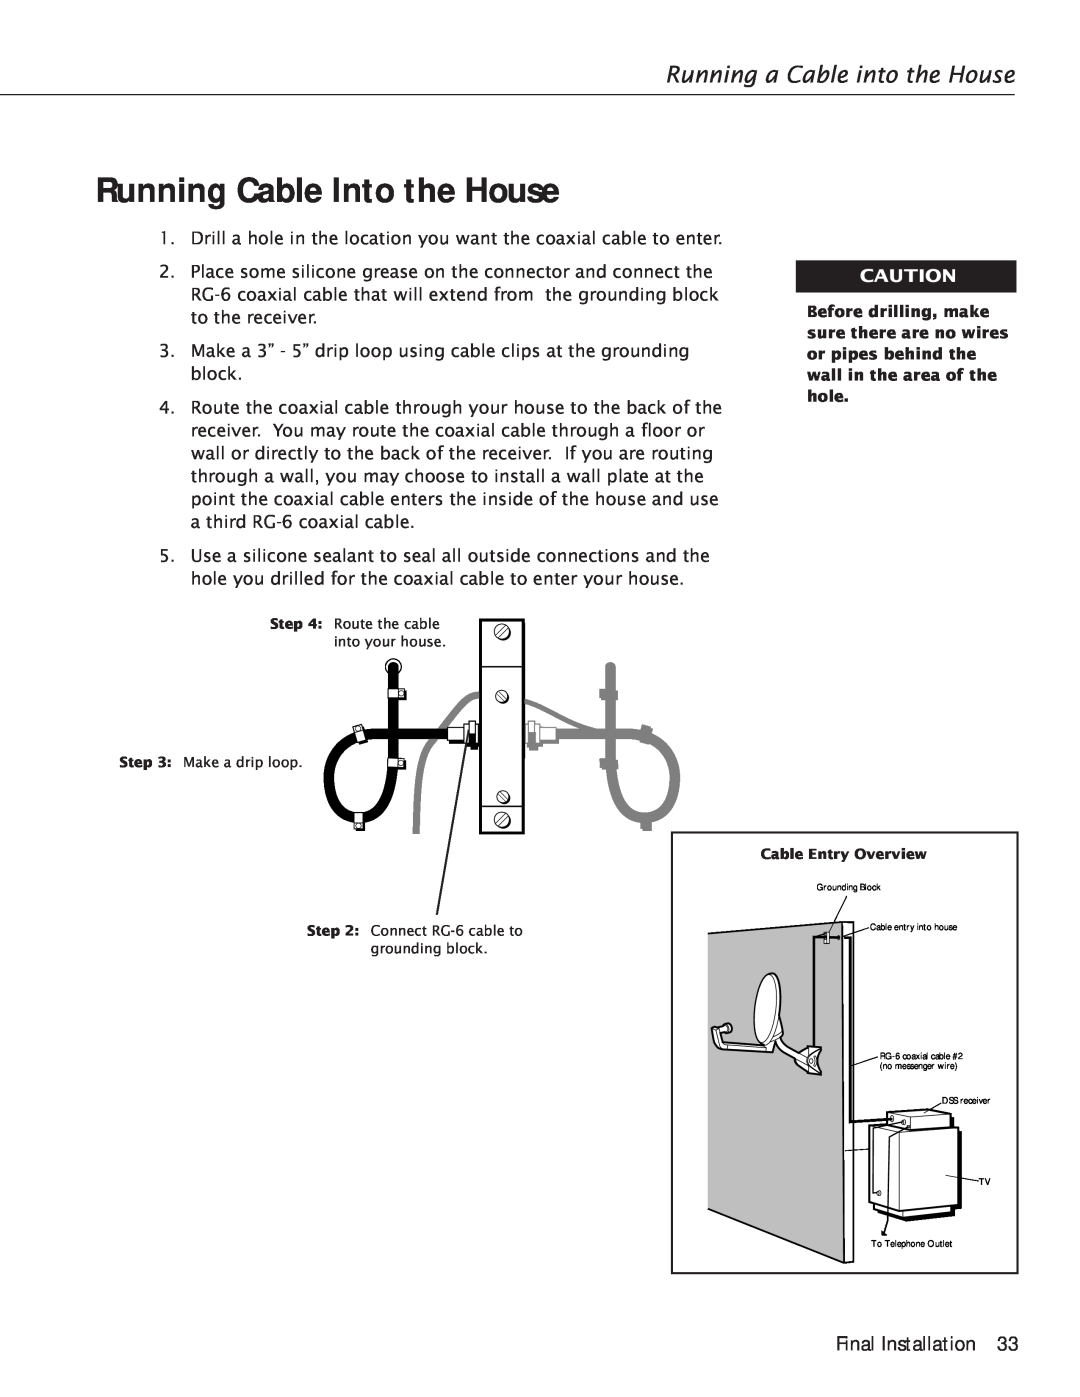 RCA Satellite TV Antenna manual Running Cable Into the House, Running a Cable into the House, Final Installation 